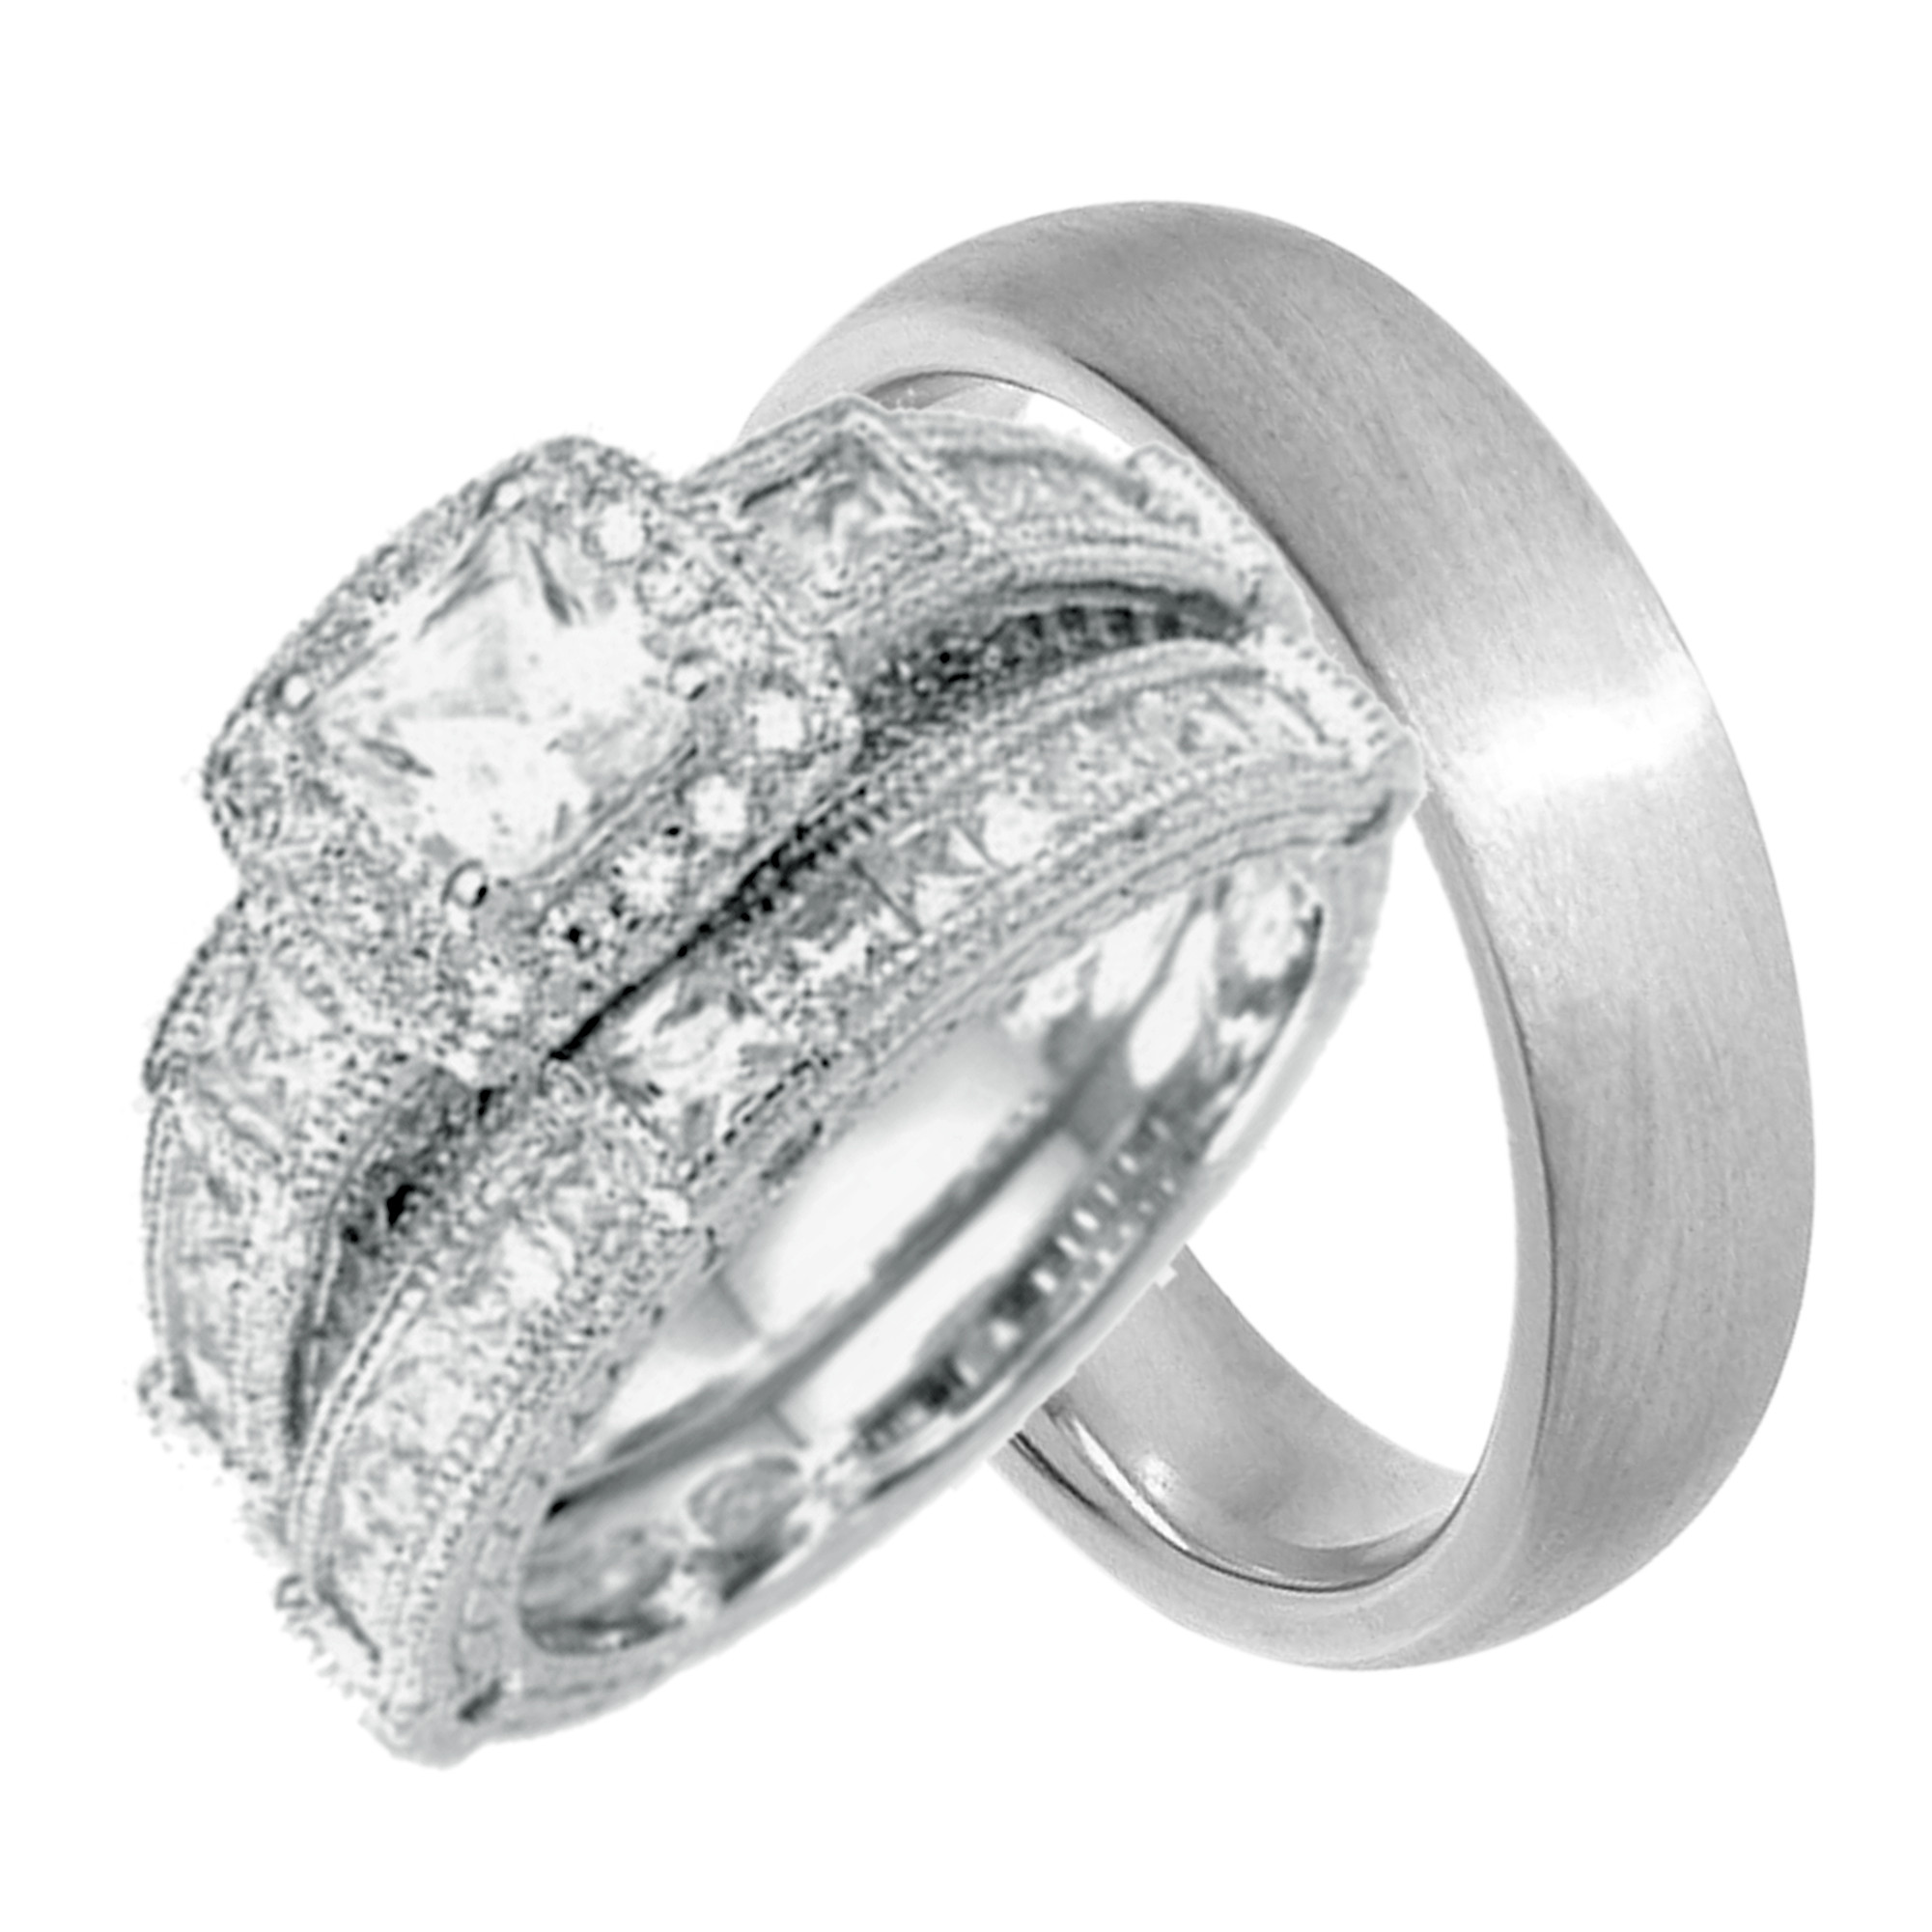 Cheap Wedding Rings For Her And Him
 LaRaso & Co His and Hers Wedding Ring Set Cheap Wedding